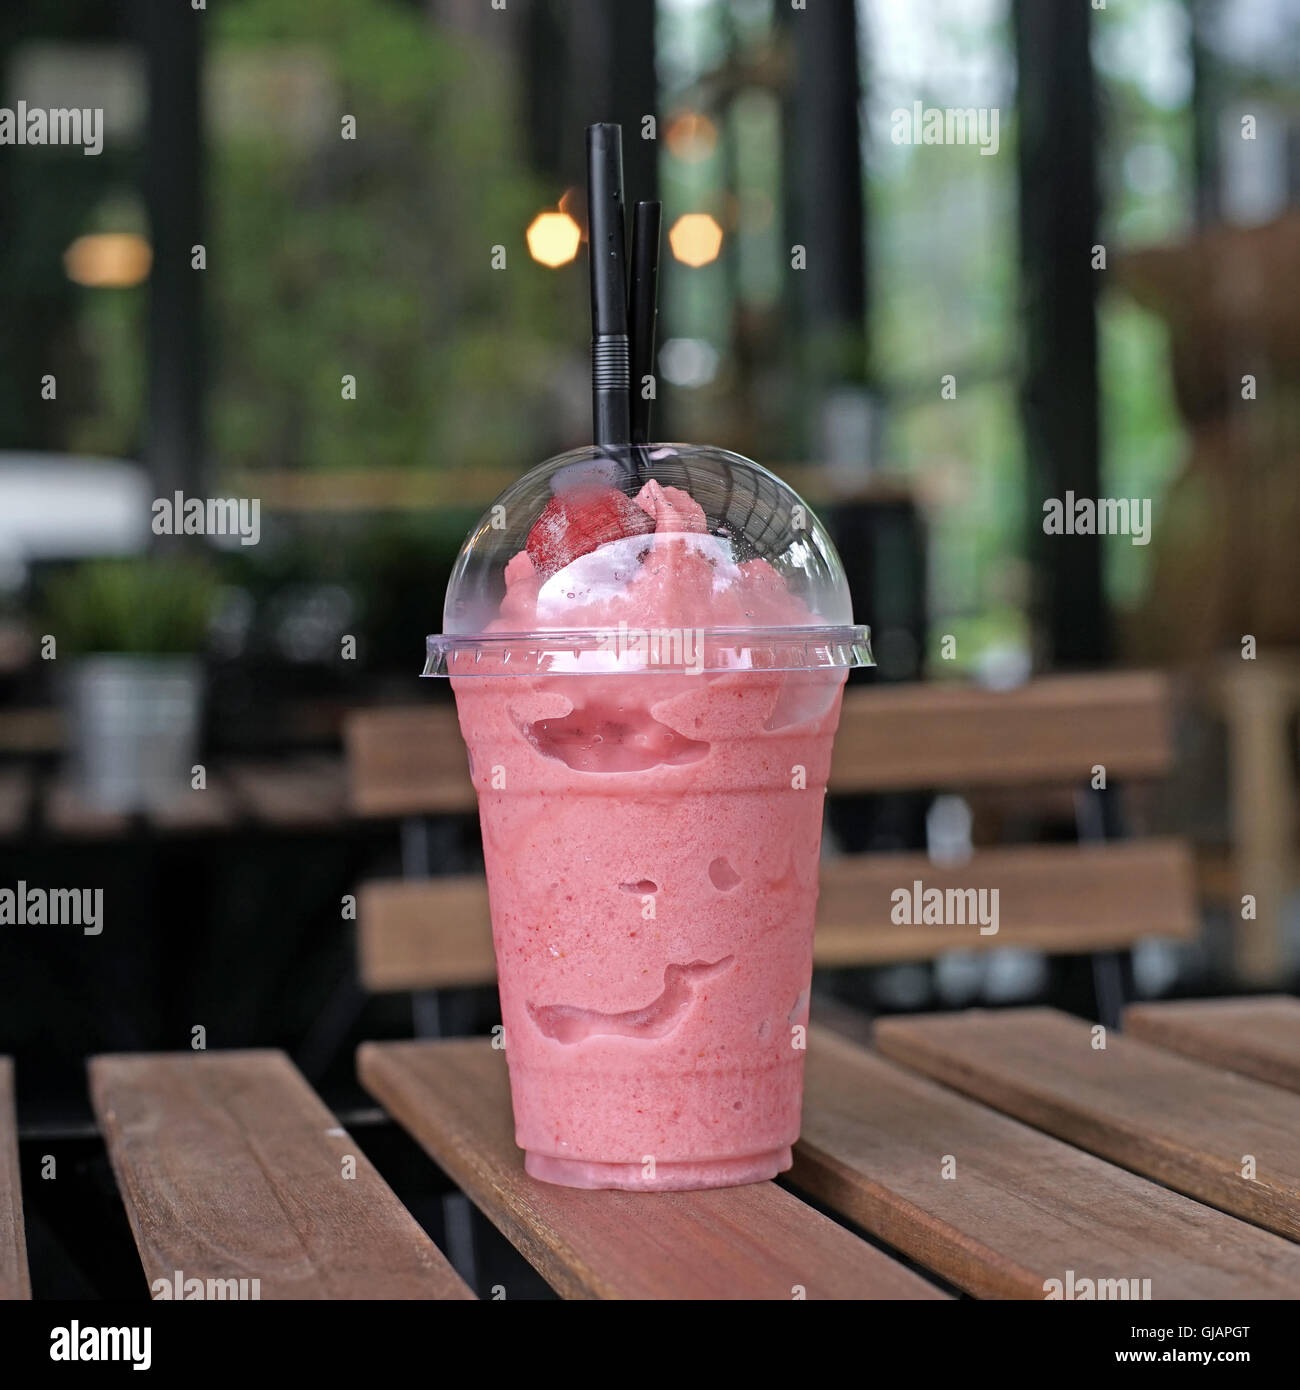 https://c8.alamy.com/comp/GJAPGT/sweet-strawberry-smoothie-in-takeaway-cup-on-wooden-table-GJAPGT.jpg